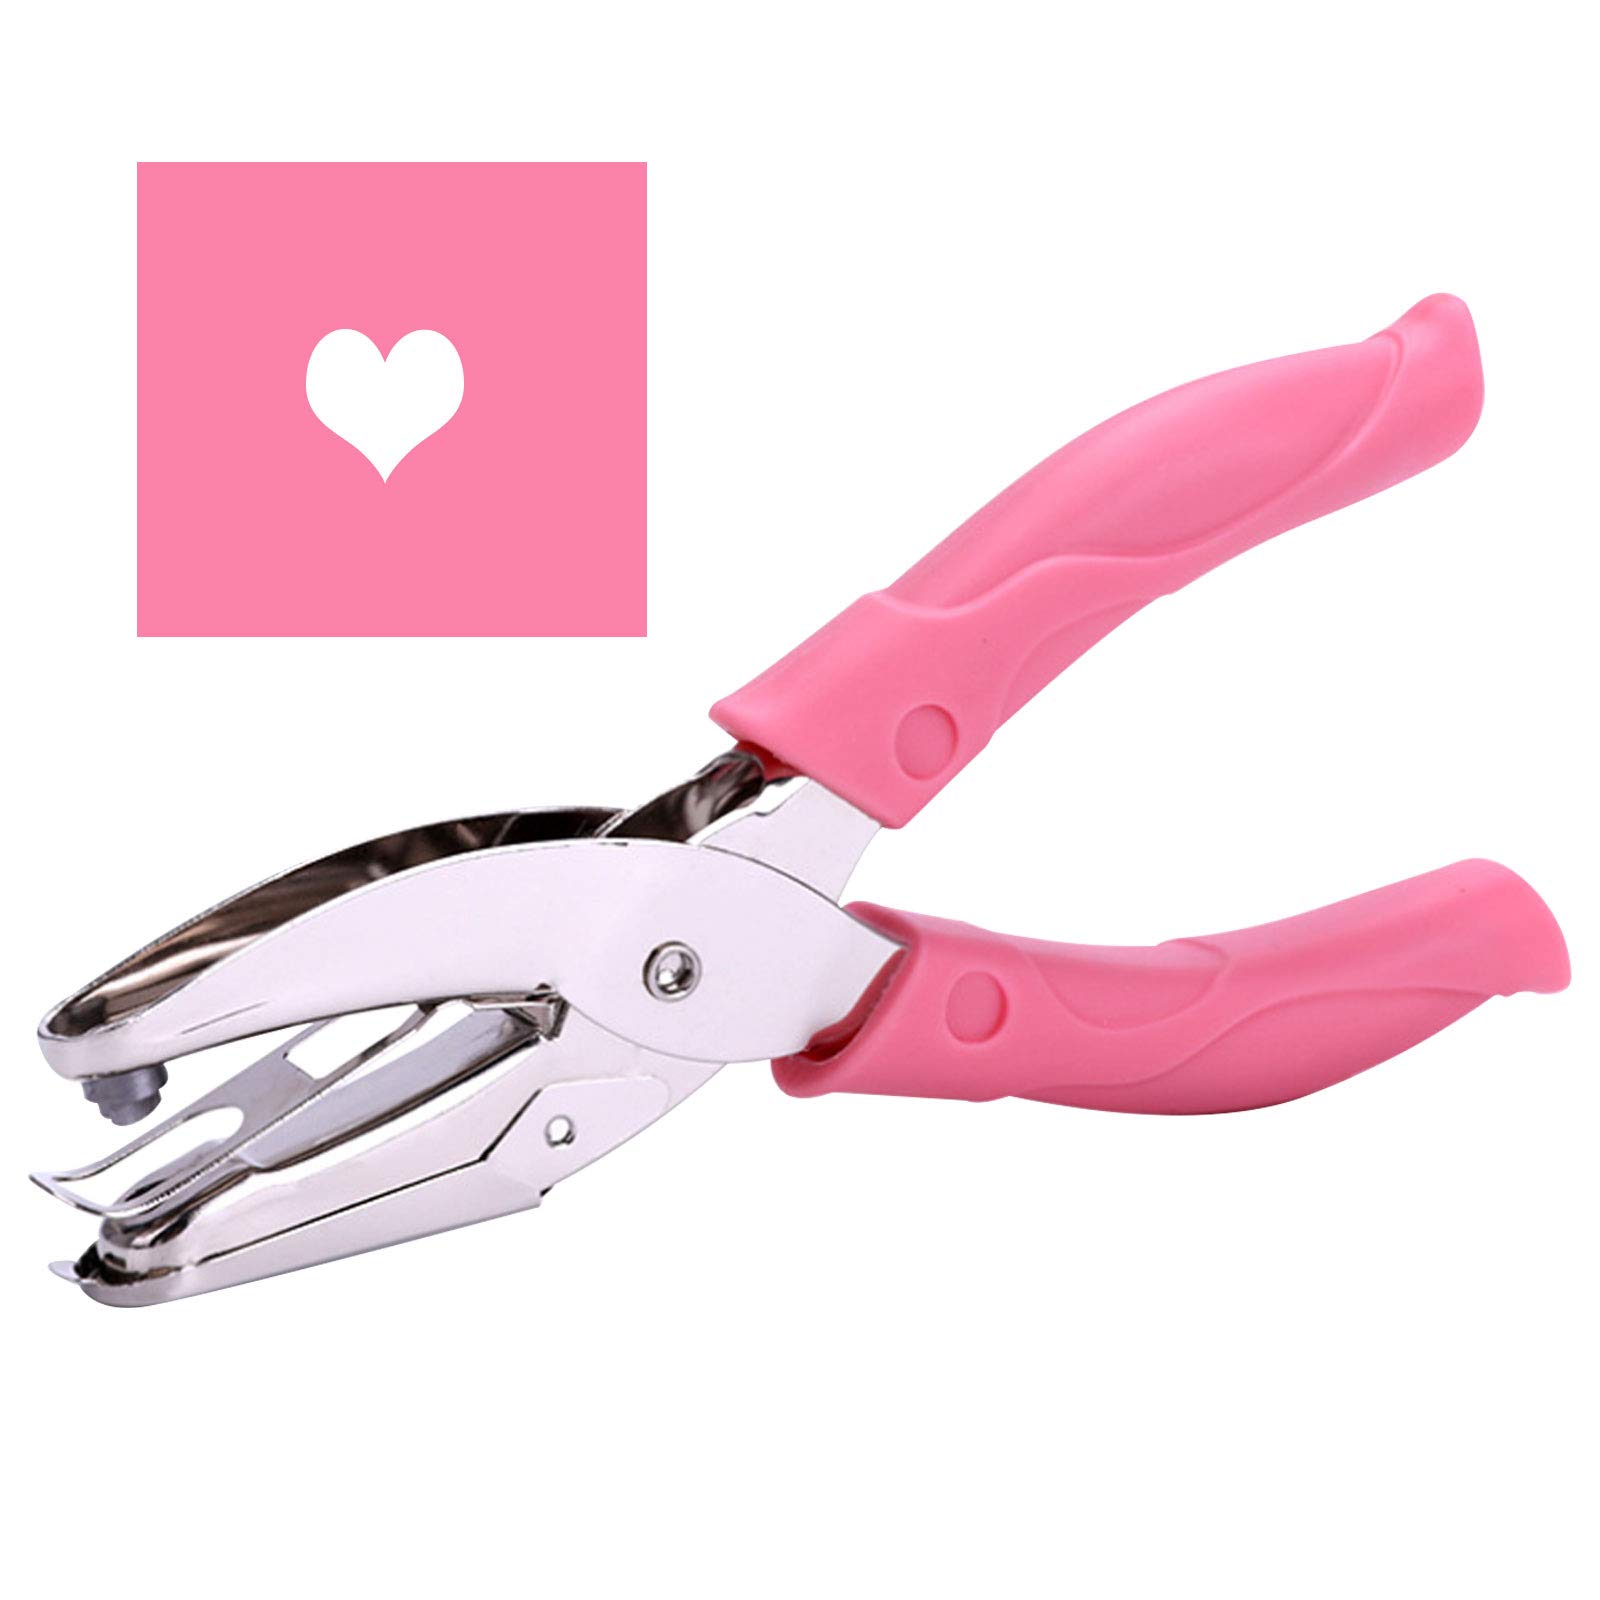 1 Pack 6.3 Inch Length 1/4 Inch Diameter of Heart Shape Hole Handheld  Single Paper Hole Punch Puncher with Pink Soft Thick Leather Cover(Heart  1/4 inch)